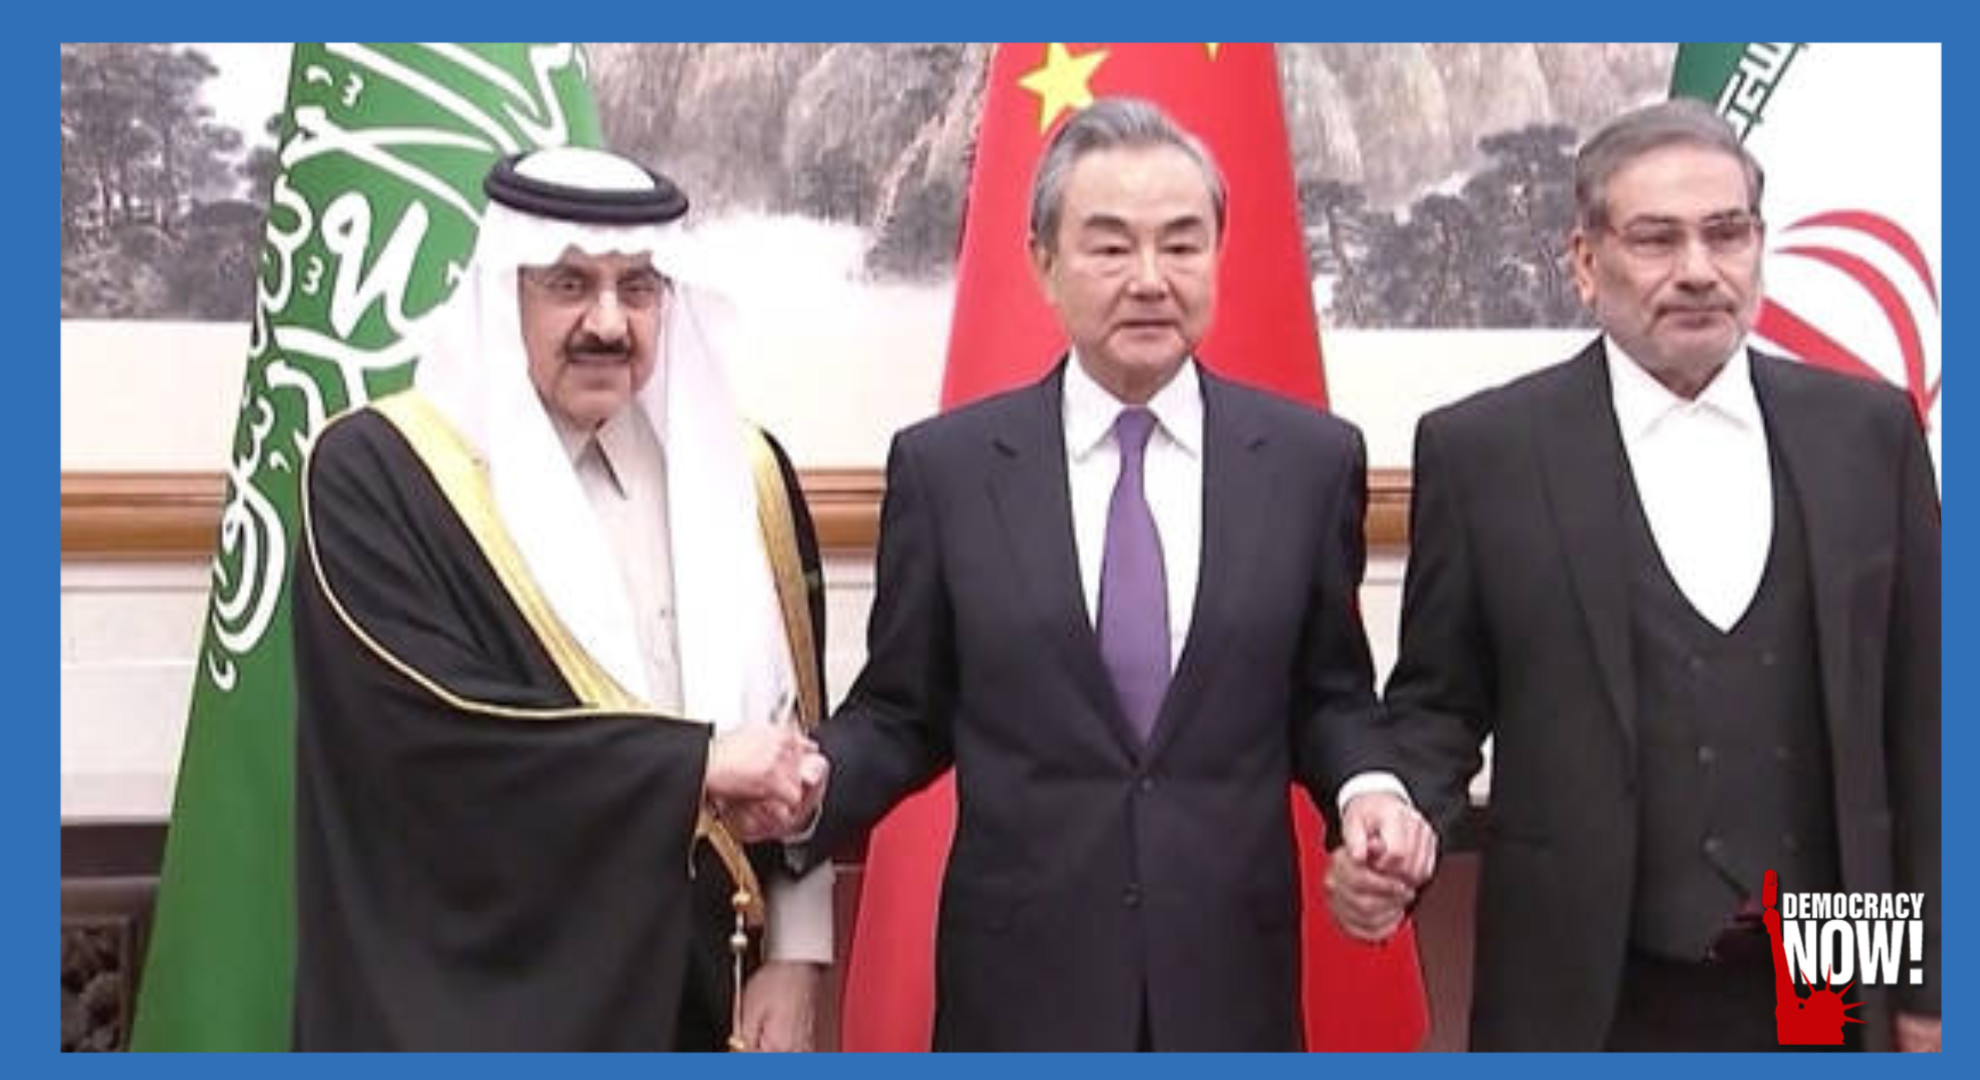 China’s Middle East Deal: Iran & Saudi Arabia Reestablish Relations as U.S. Watches from Sidelines